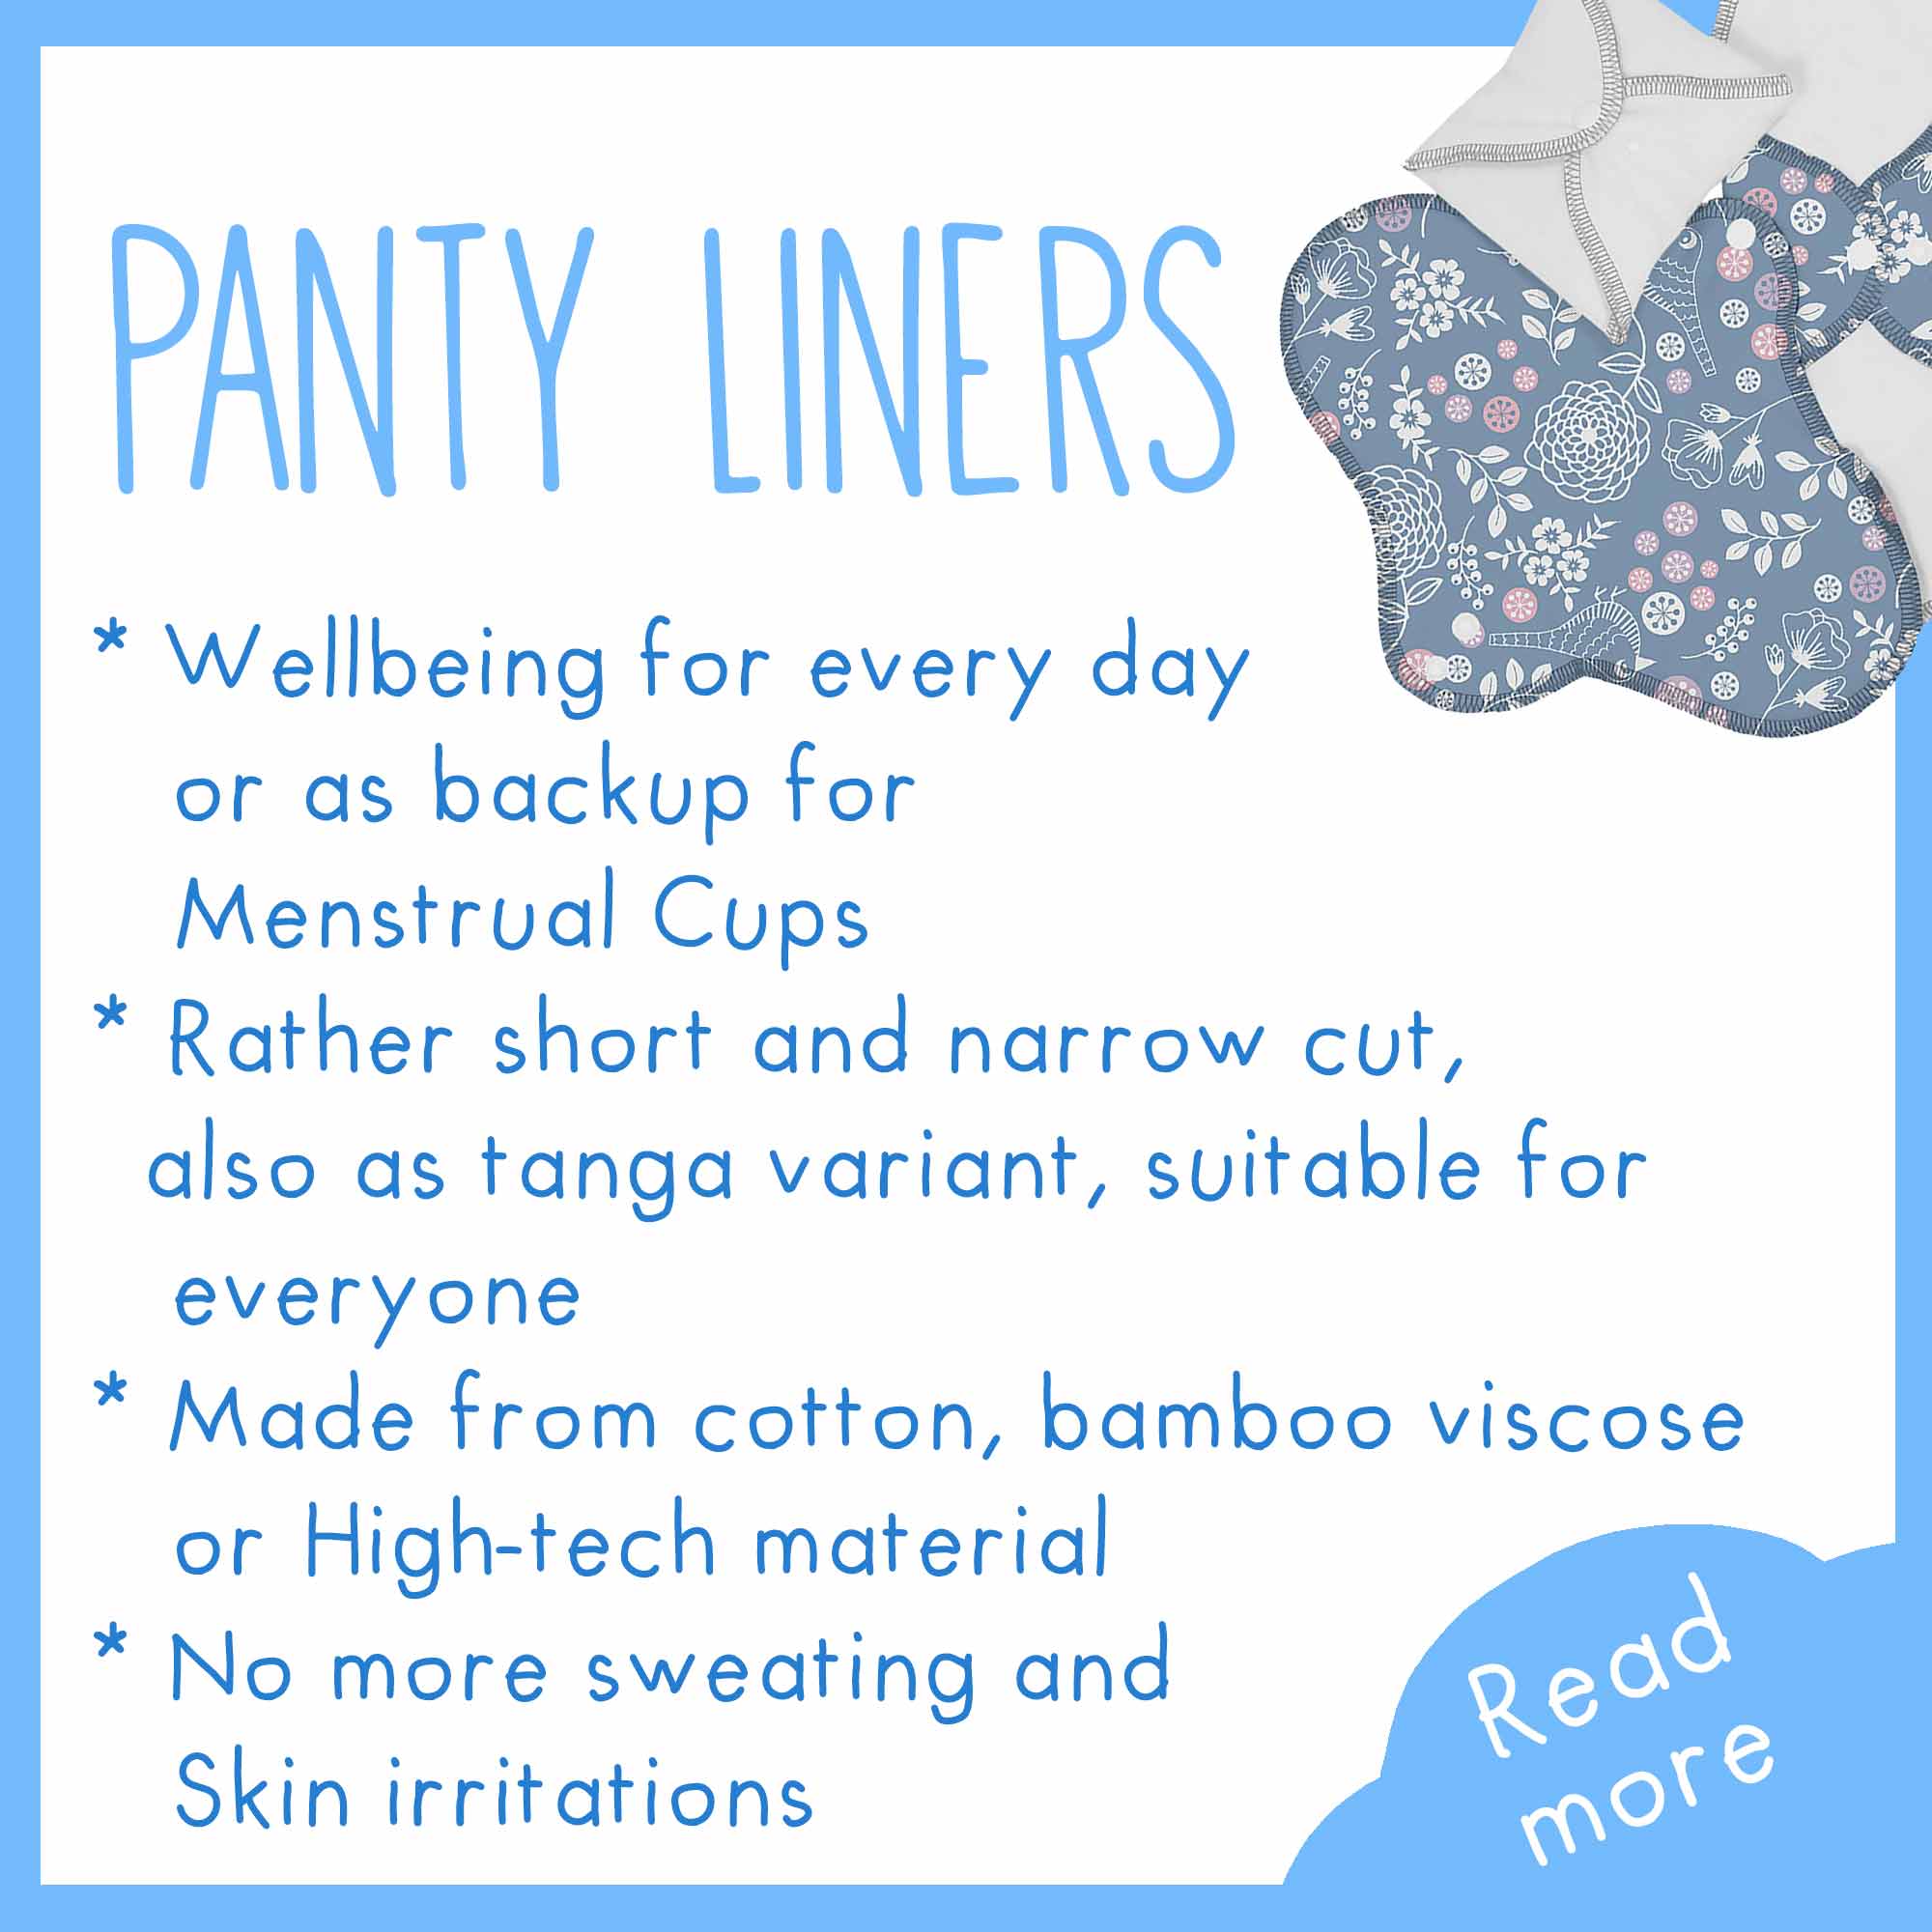 Panty liners, wellbeing for every day or as backup for menstrual cups, rather short and narrow cut, also as tanga variant, suitable for everyone, made from cotton, bamboo viscose or high-tech material, no more sweating and skin irritations